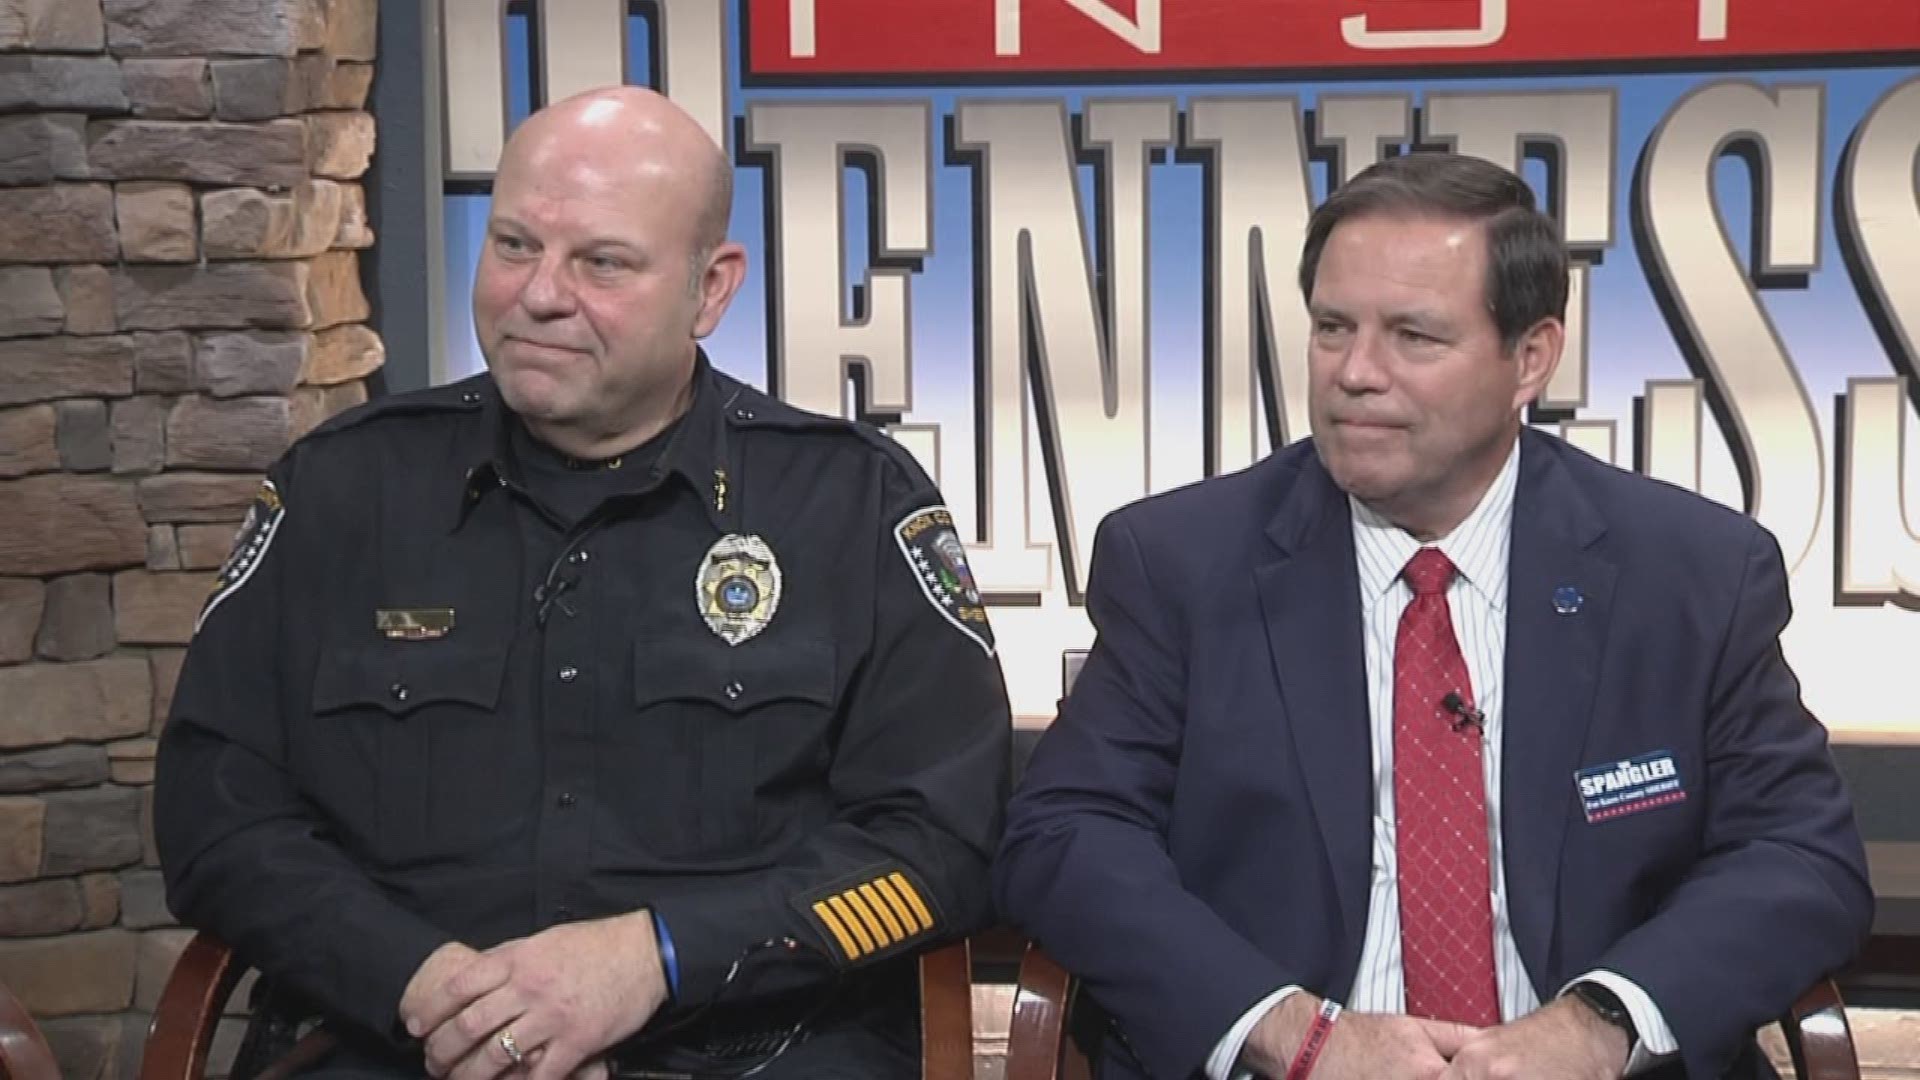 Knox County candidates for sheriff Lee Tramel and Tom Spangler talk about the race.